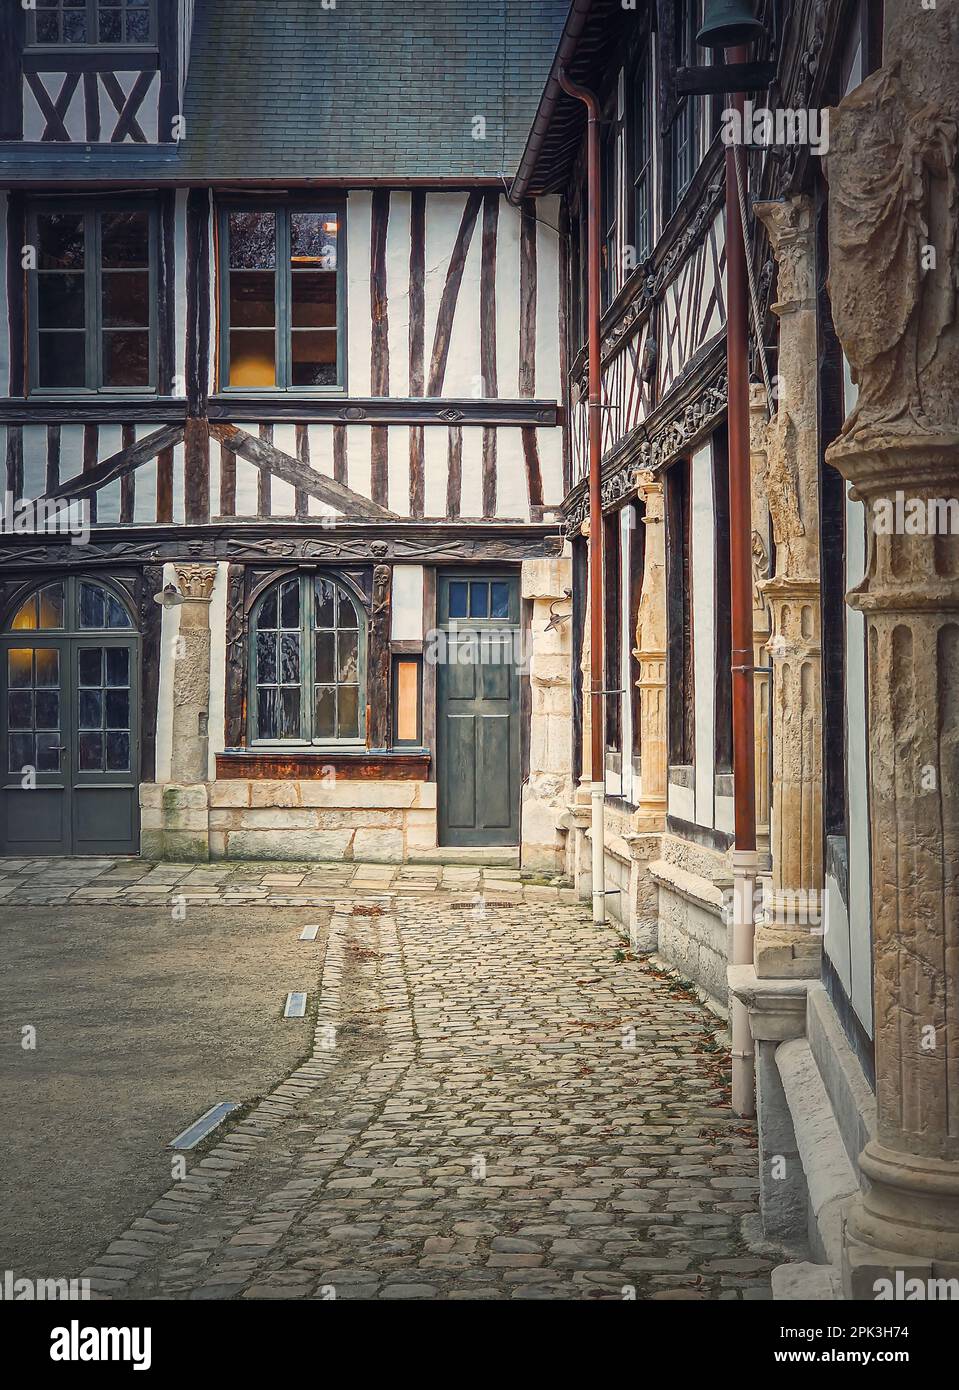 Saint-Maclou aitre, aster courtyard of medieval cemetery. Fachwerk architecture, half timbered facades details of the buildings located in Rouen, Norm Stock Photo